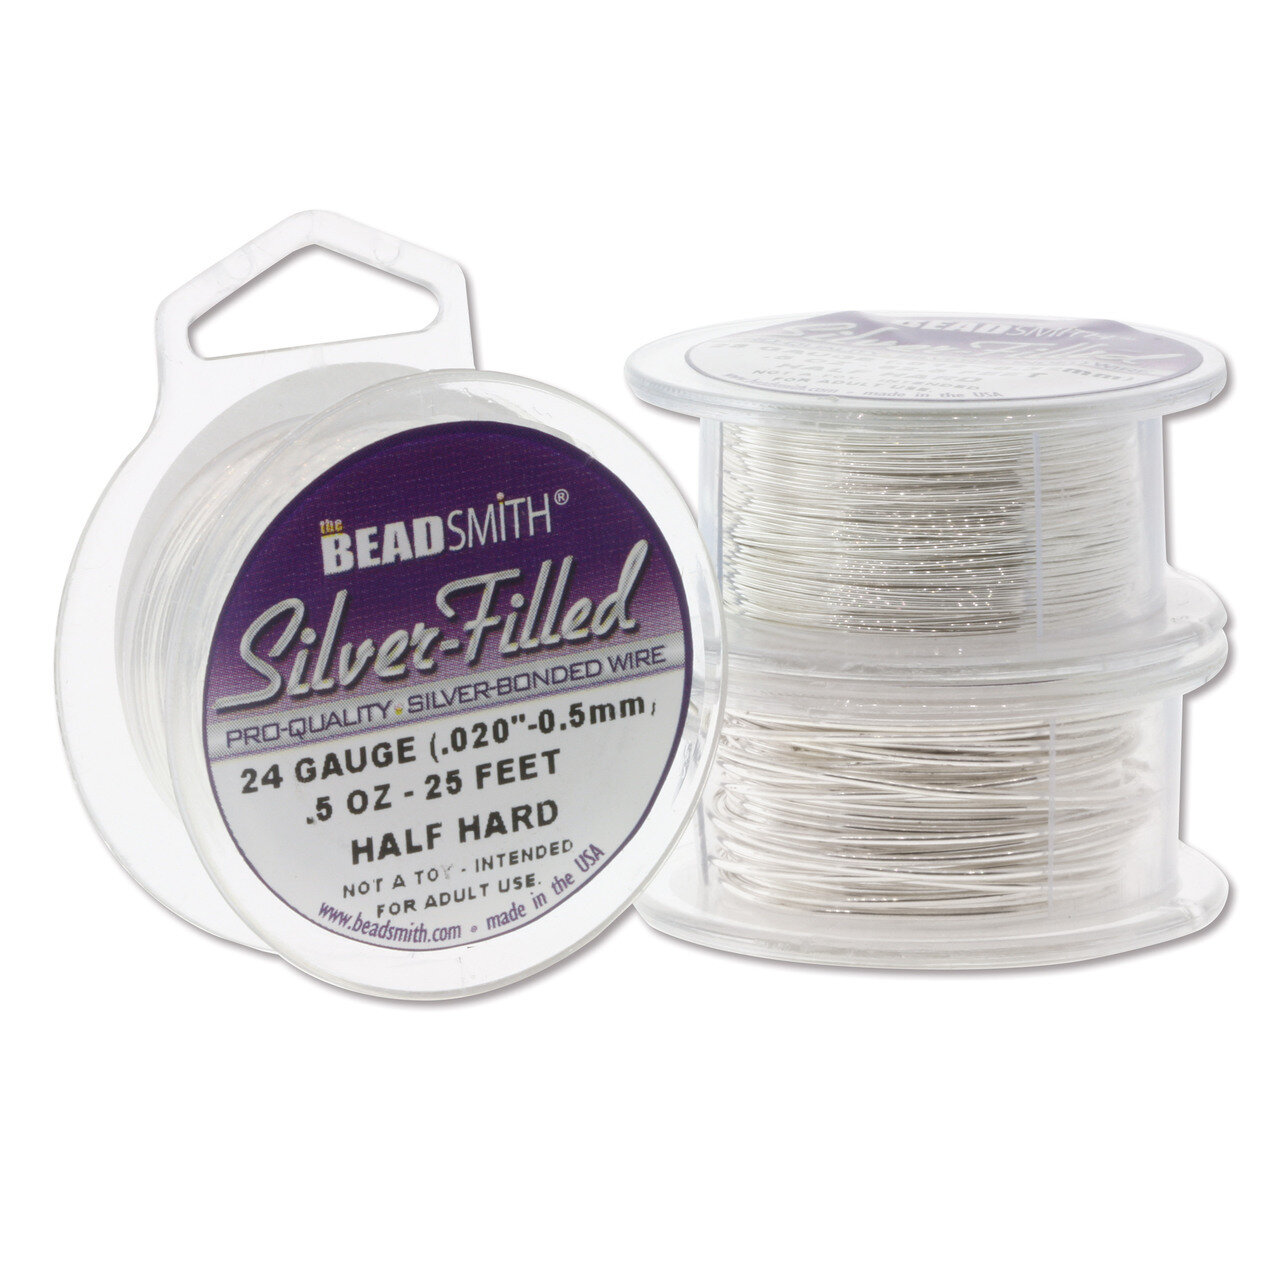 22 Gauge .64 mm. Thick 15.62Ft Wire Silver-filled Half-hard 1/2oz CRD848/22